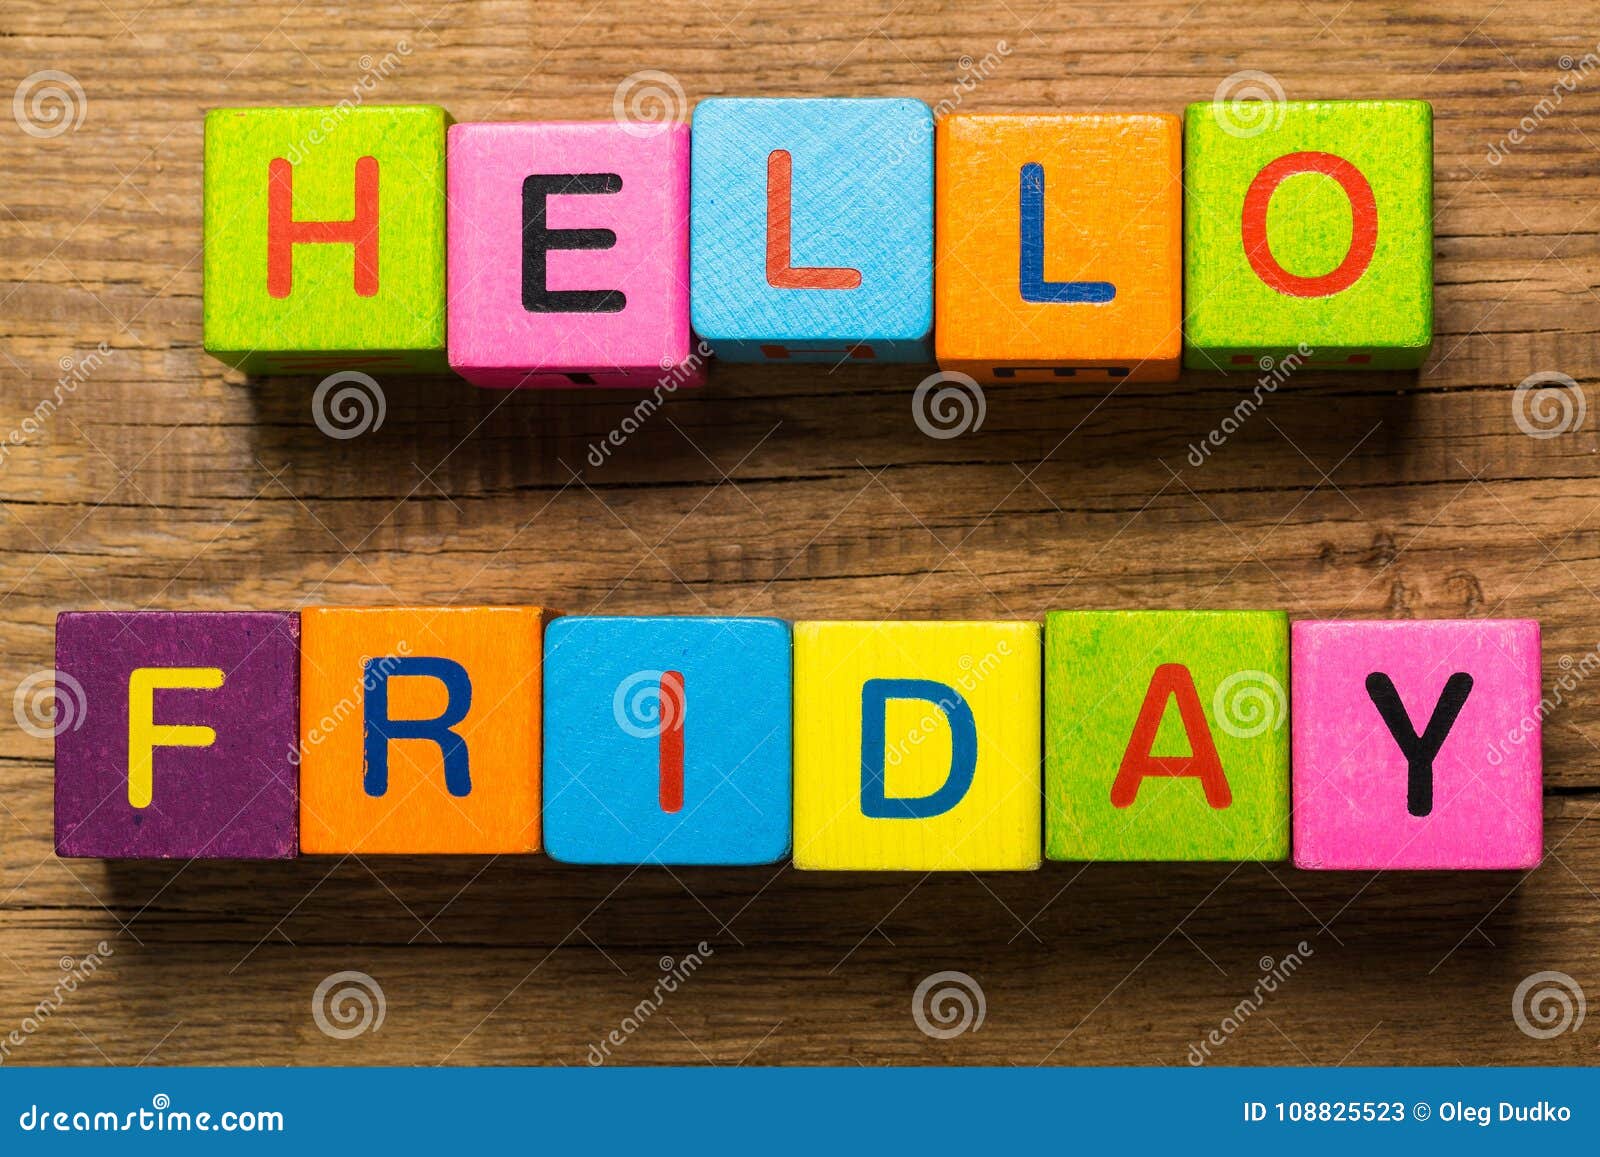 Hello Friday Message Written on Cubes Stock Image - Image of selection ...